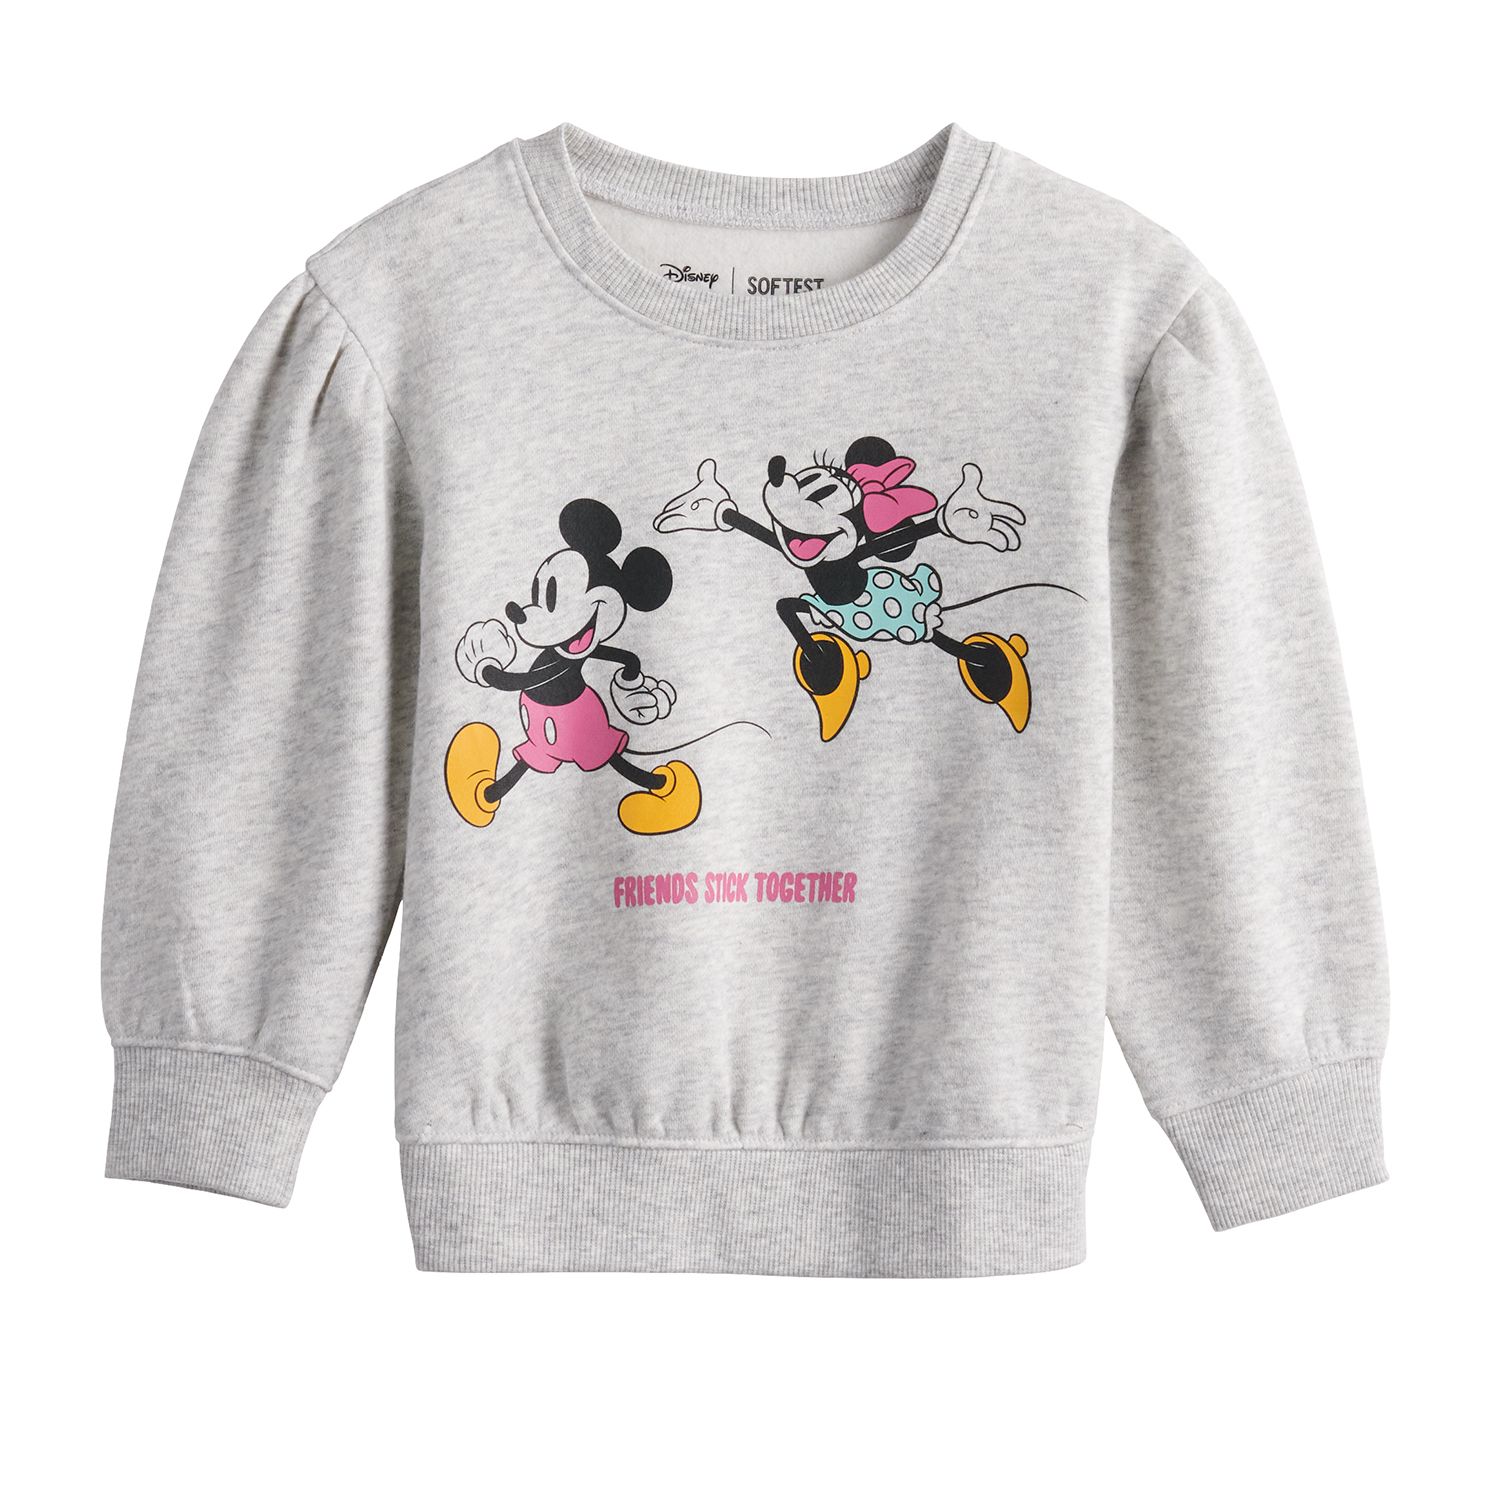 Image for Disney/Jumping Beans Disney's Mickey & Minnie Mouse Toddler Girl Fleece Sweatshirt by Jumping Beans® at Kohl's.